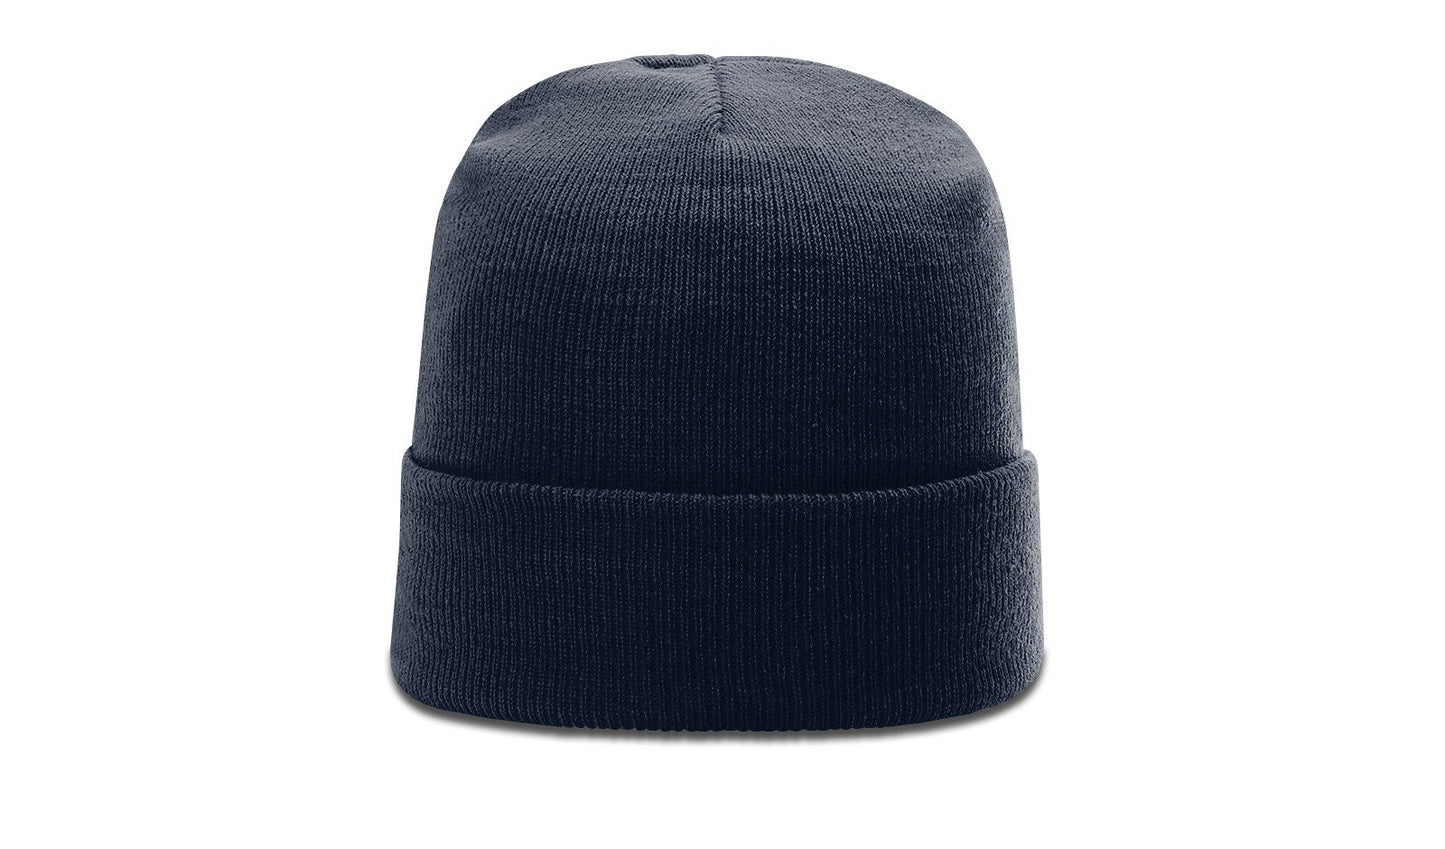 Richardson R18 Solid Beanie with Cuff Knit Cap - Blank